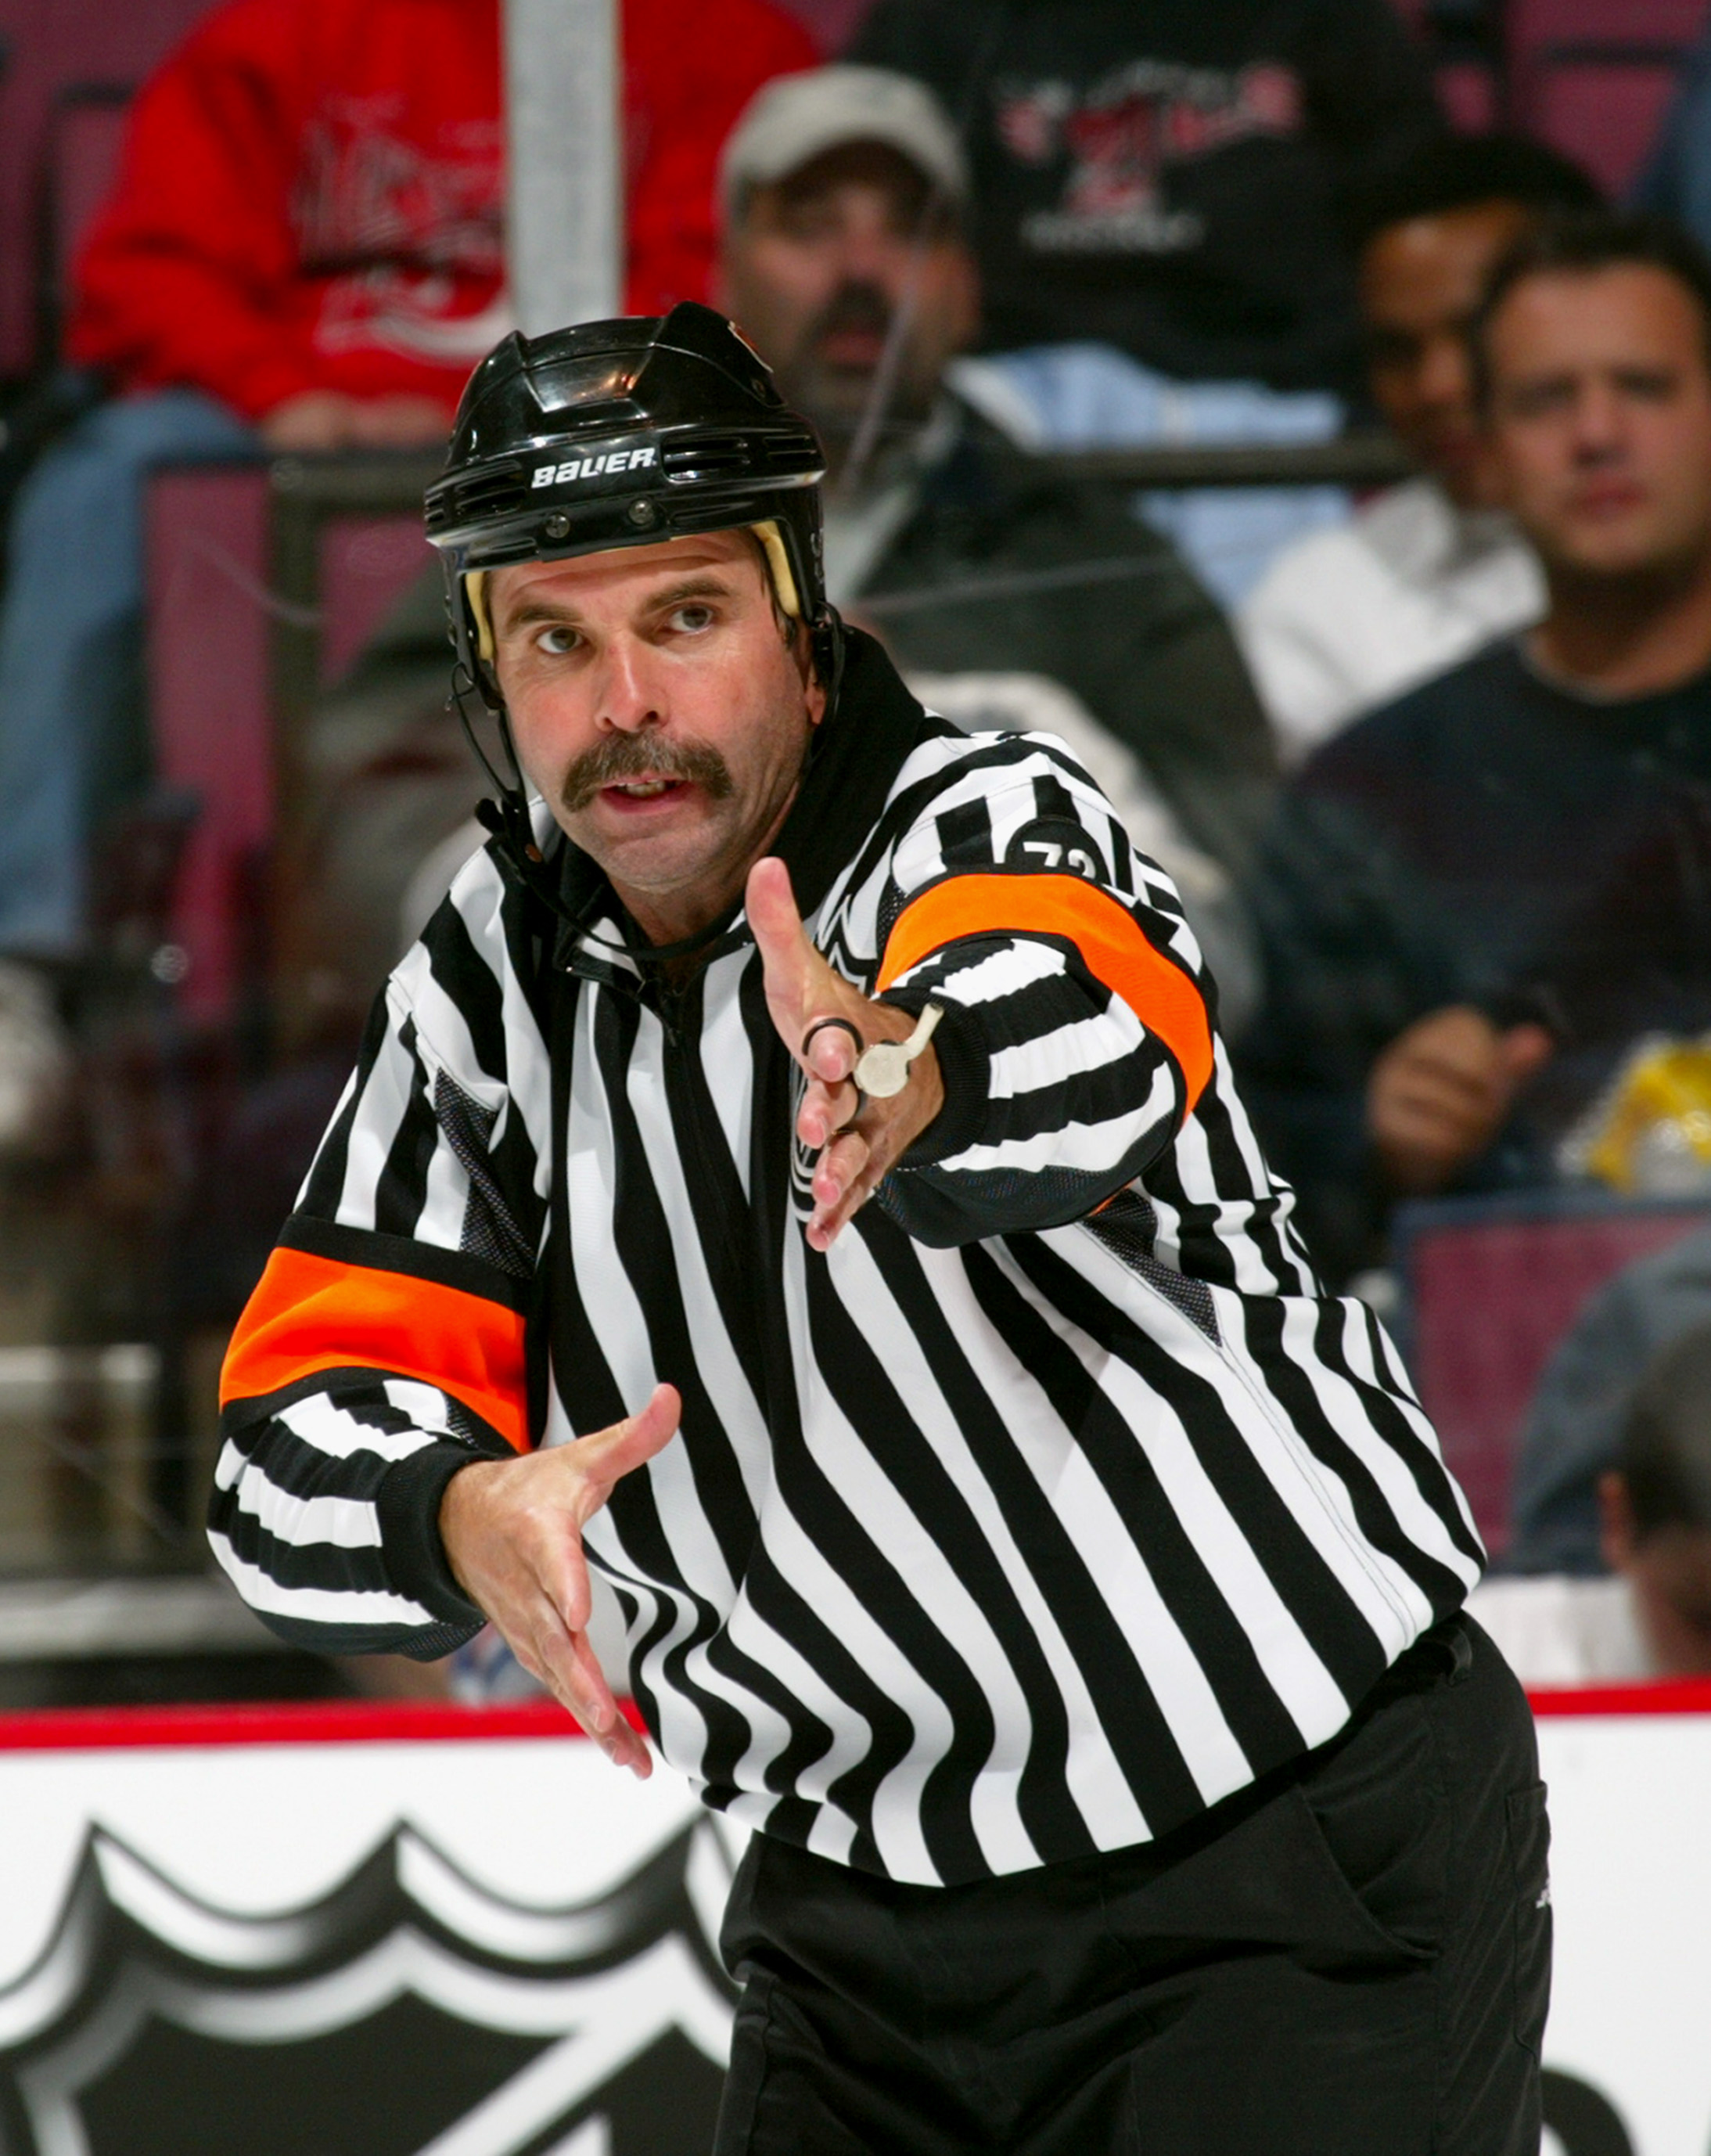 Know Your Rule: Top 5 NHL Officials